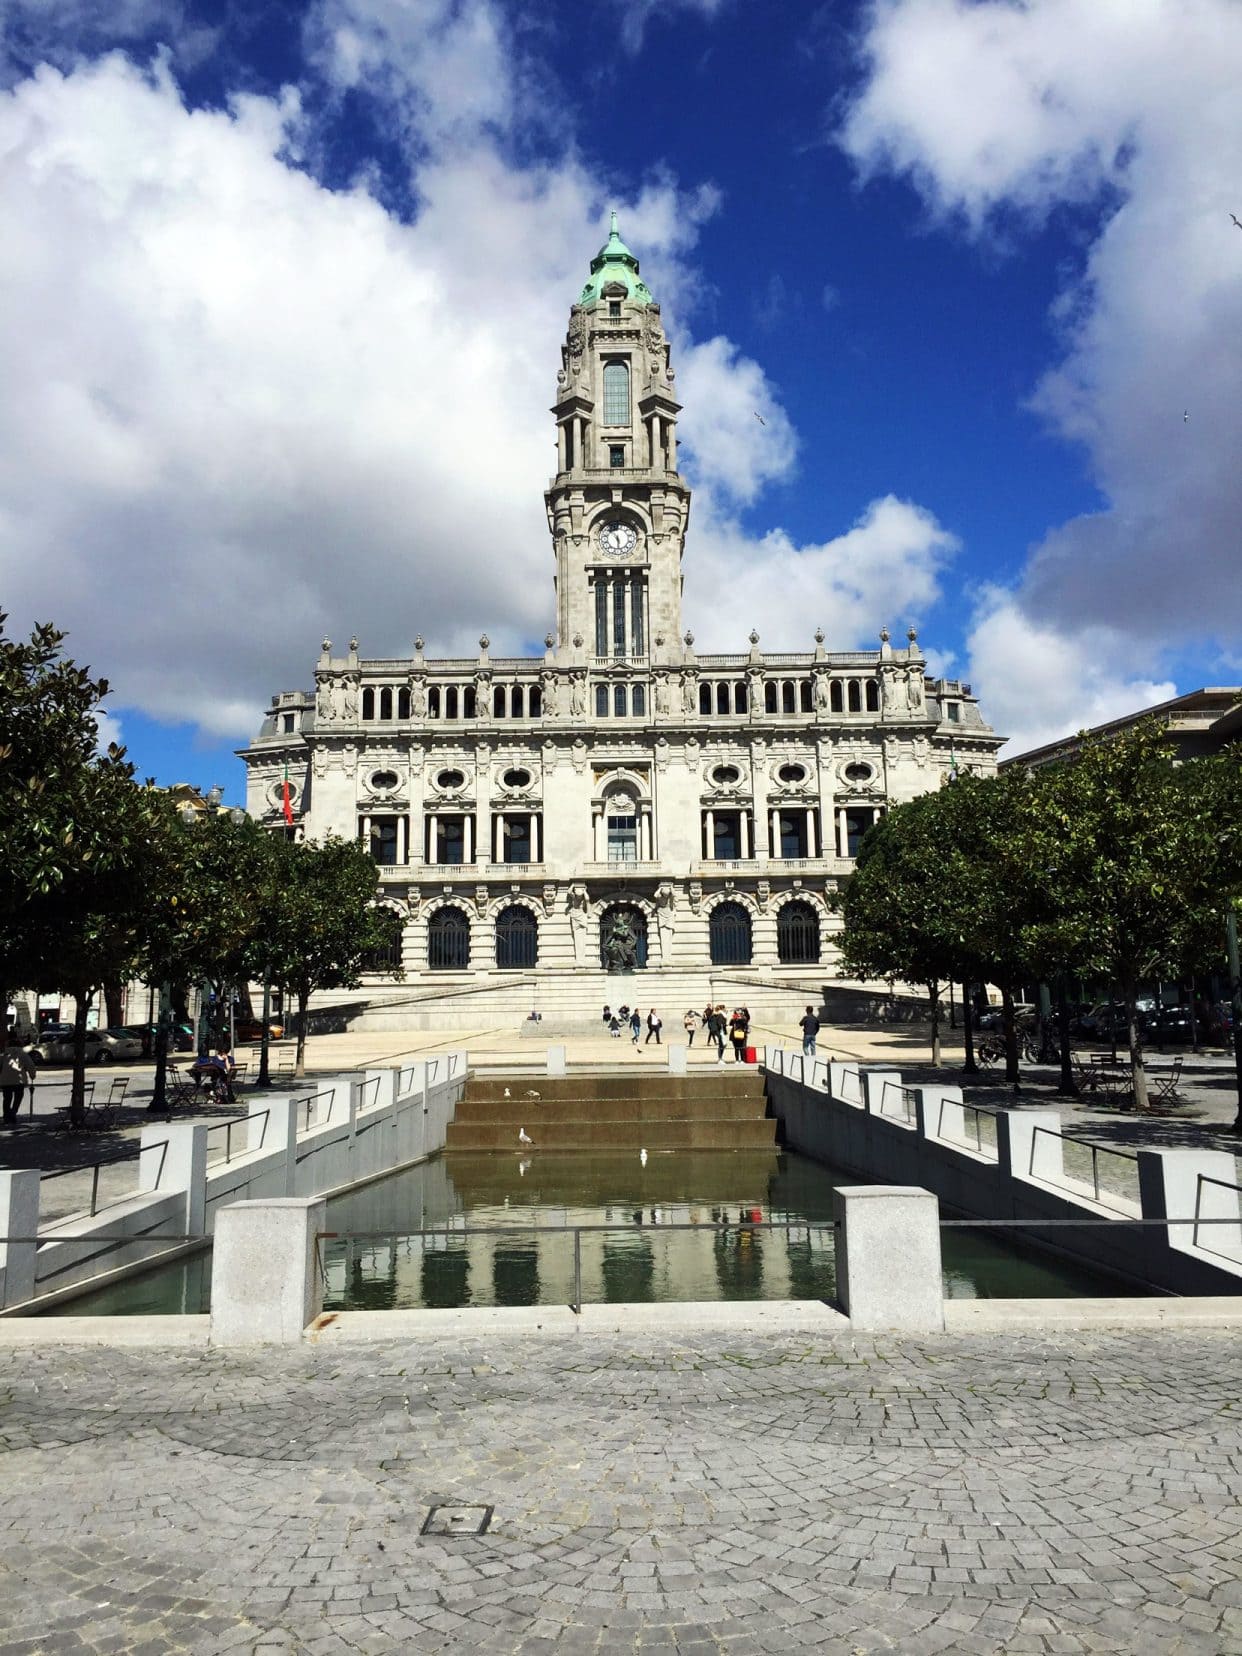 Porto town hall behind a rectangular water pond. The building is rectangular and has a steeple like structure in the centre